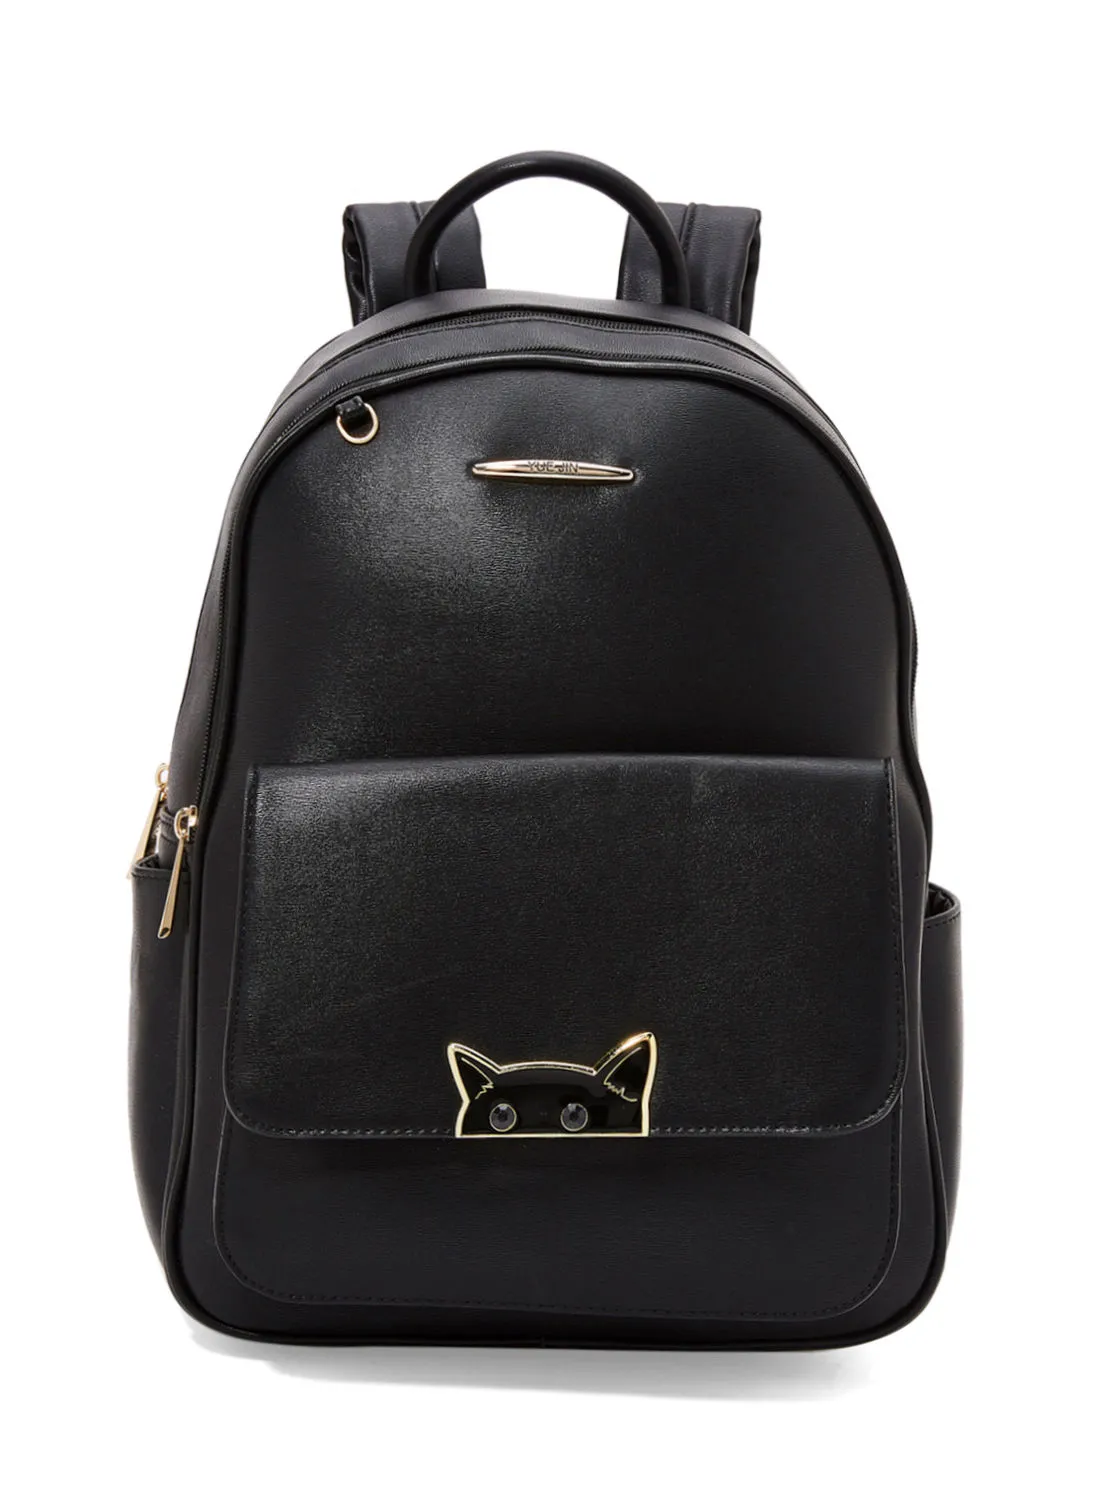 YUEJIN Faux Leather Backpack Black